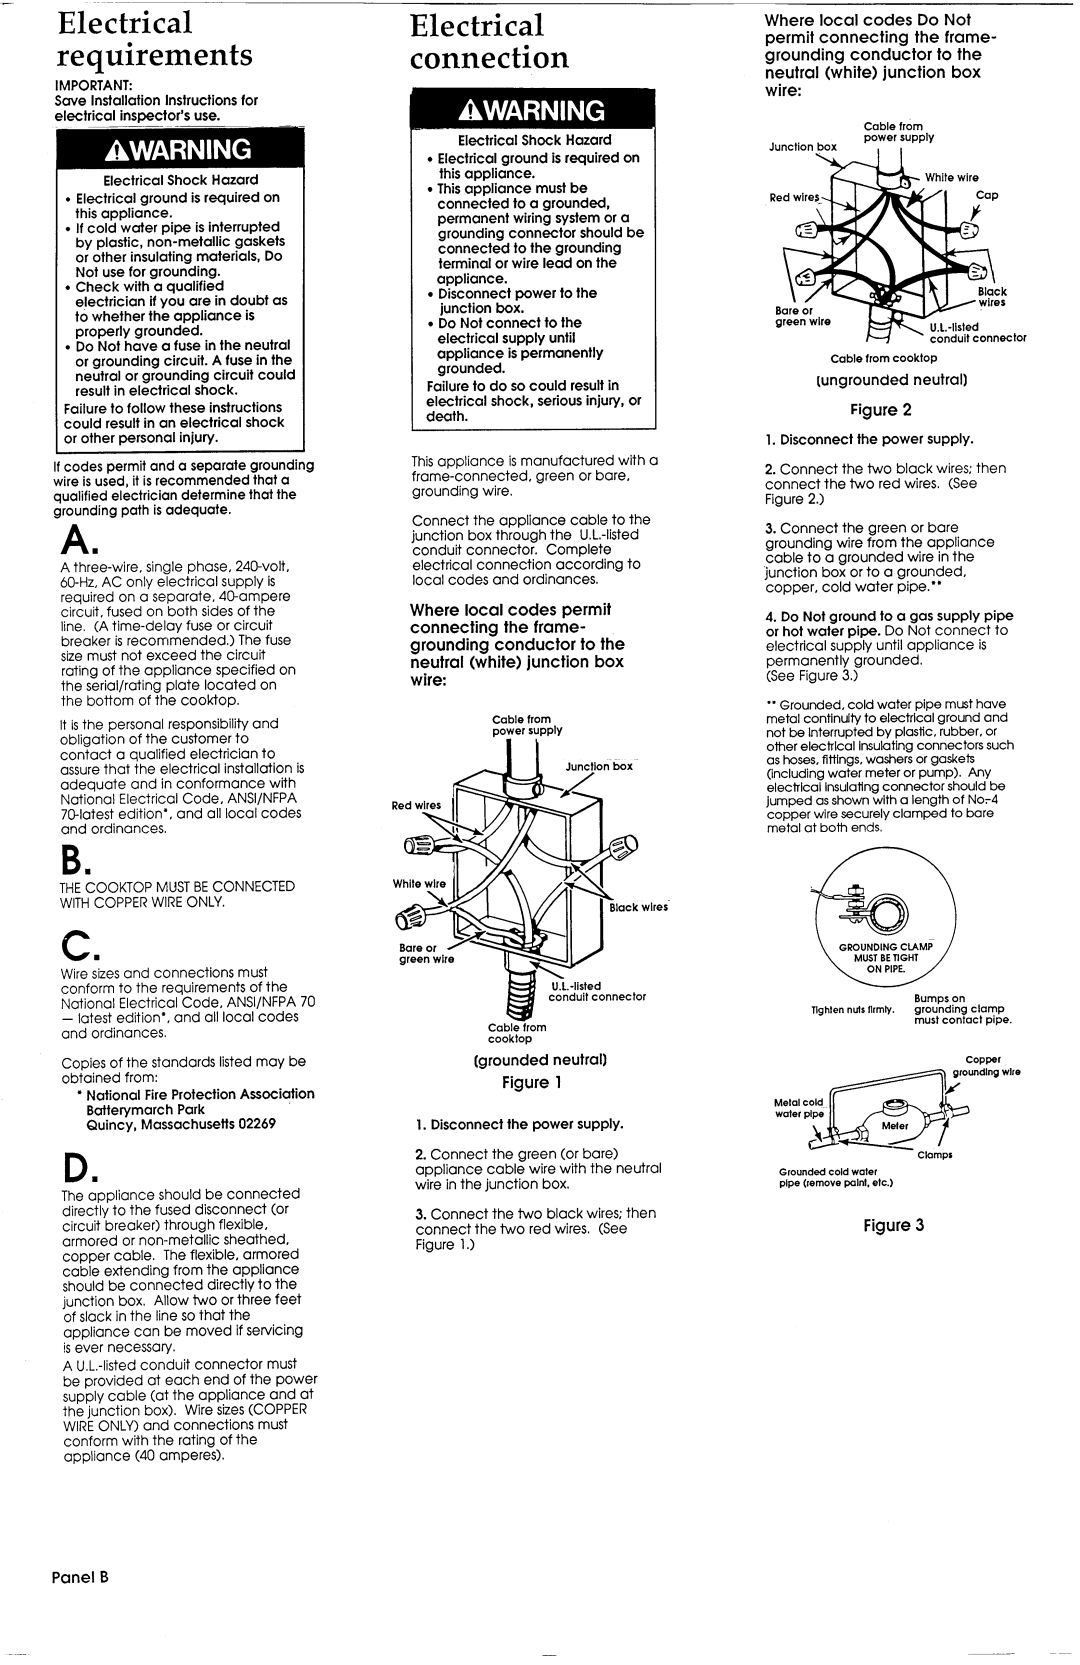 Whirlpool Cooktop installation instructions Electrical requirements, Electrical connection, Panel B 